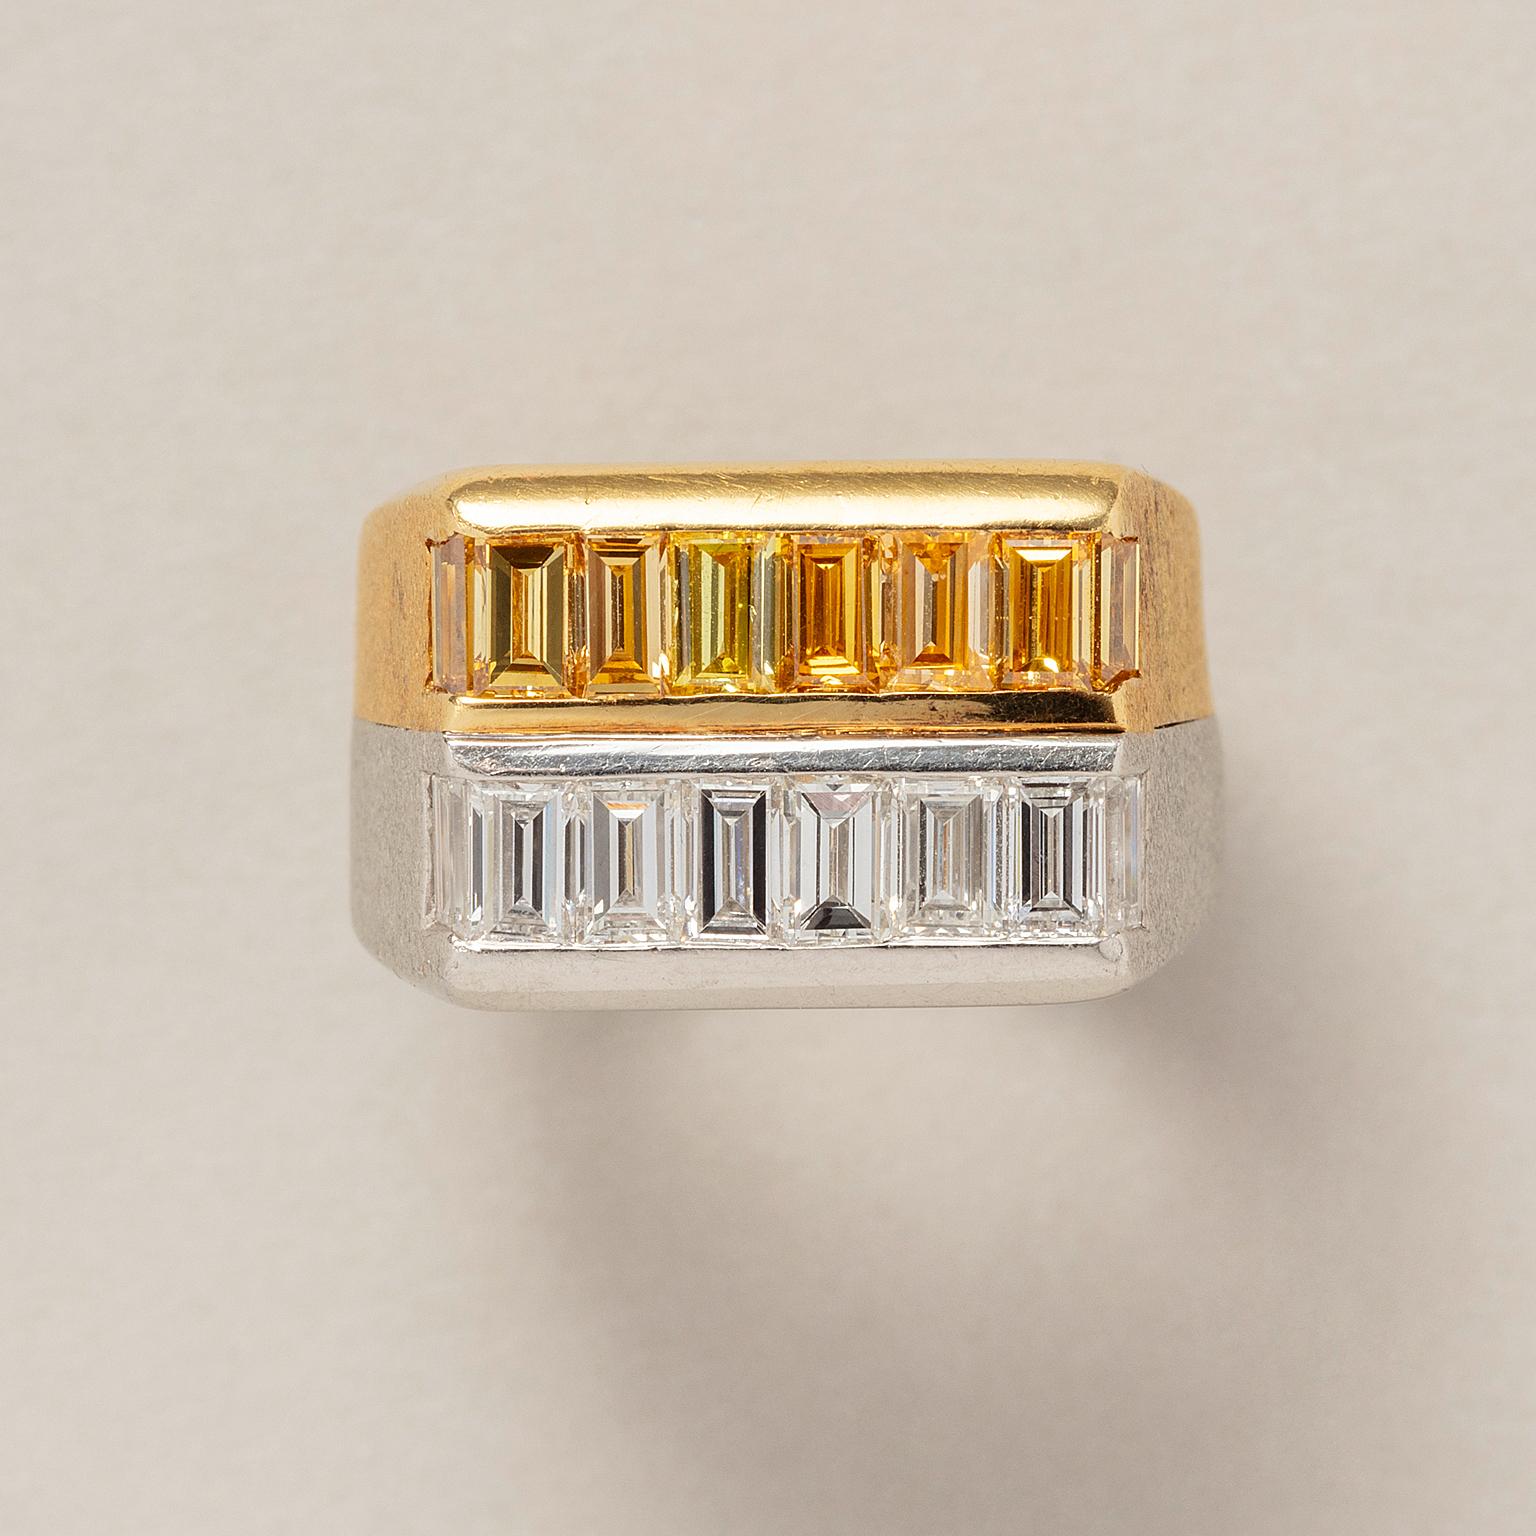 An 18 carat yellow gold and platinum row ring, the yellow gold part is set with a line of 8 fancy yellow baguette cut diamonds (app. 1 carat Vvs) and the platinum row is set with 8 white baguette cut diamonds (app. 1 carat F-G, Vvs), the shank is